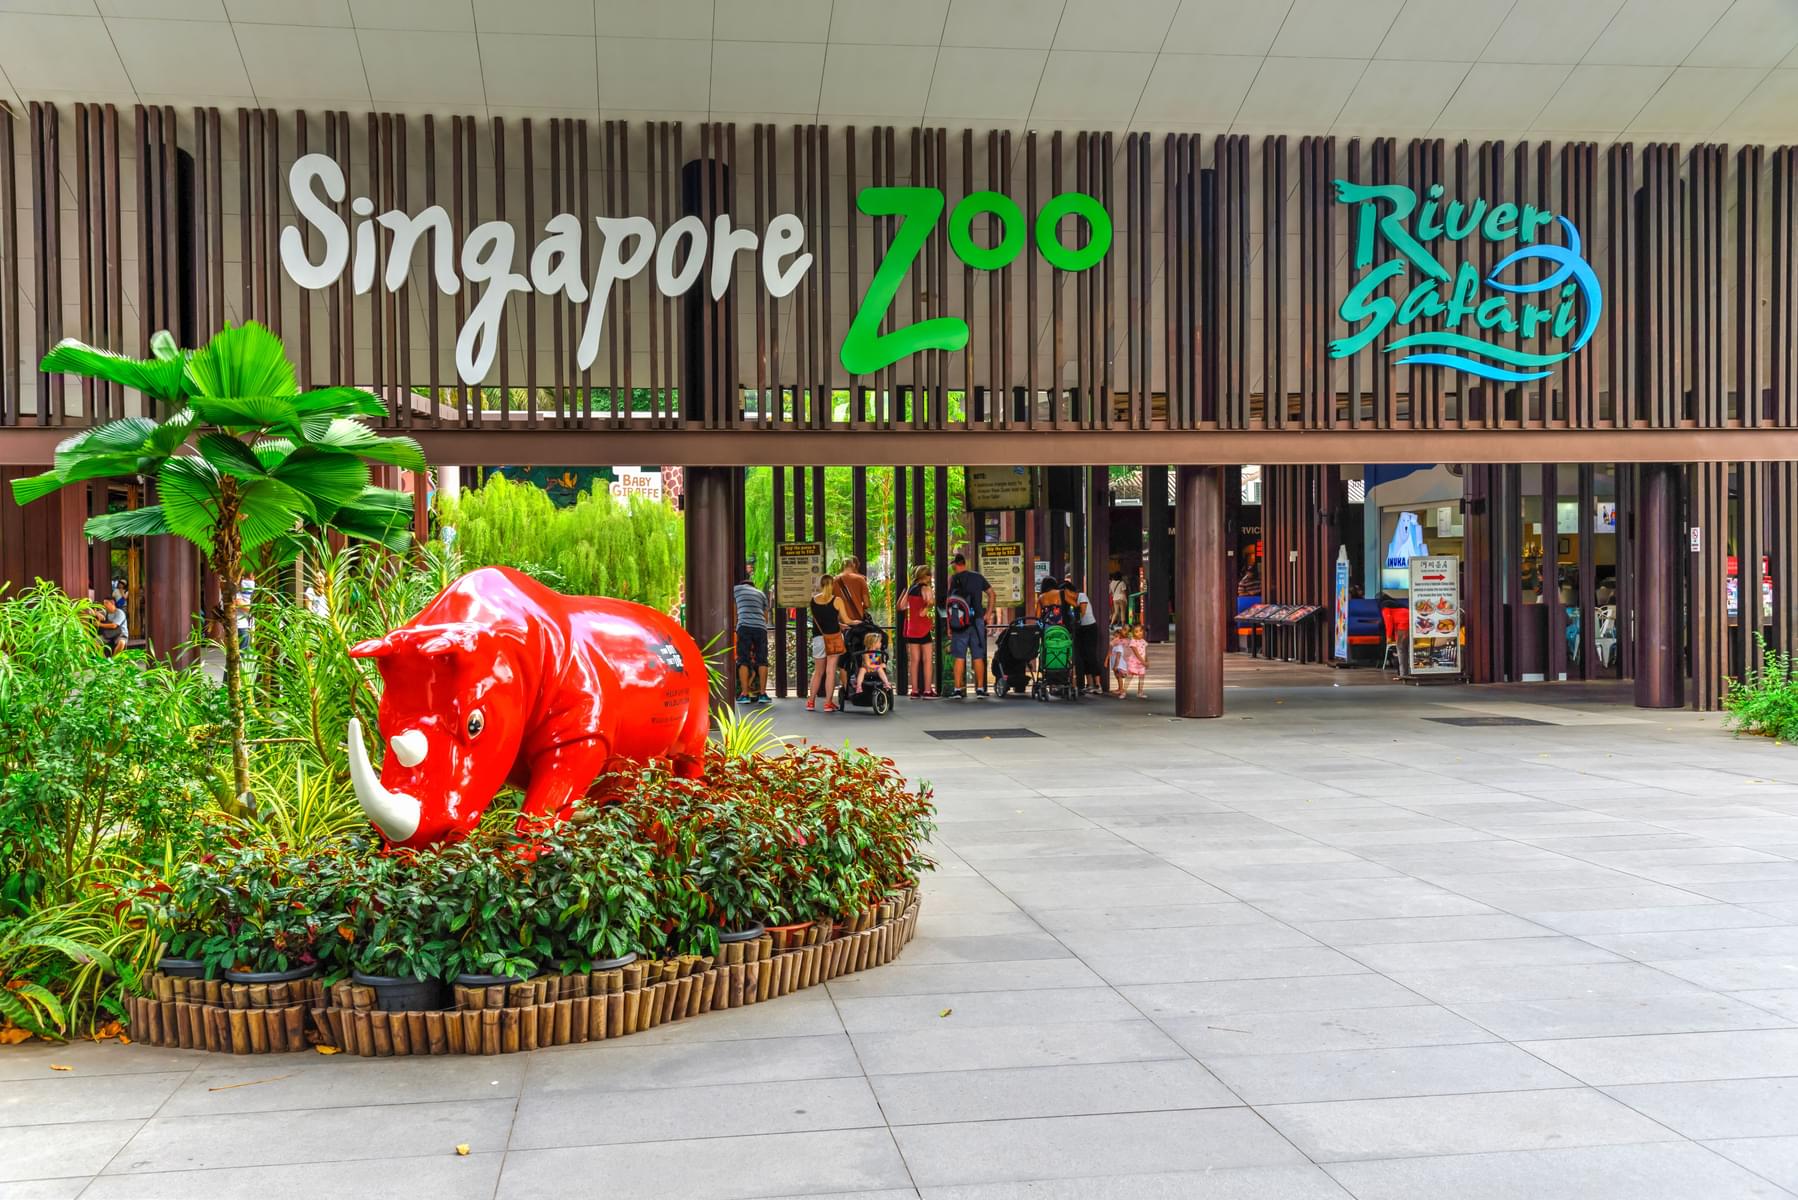 Take a glimpse of lovely animals at Singapore Zoo